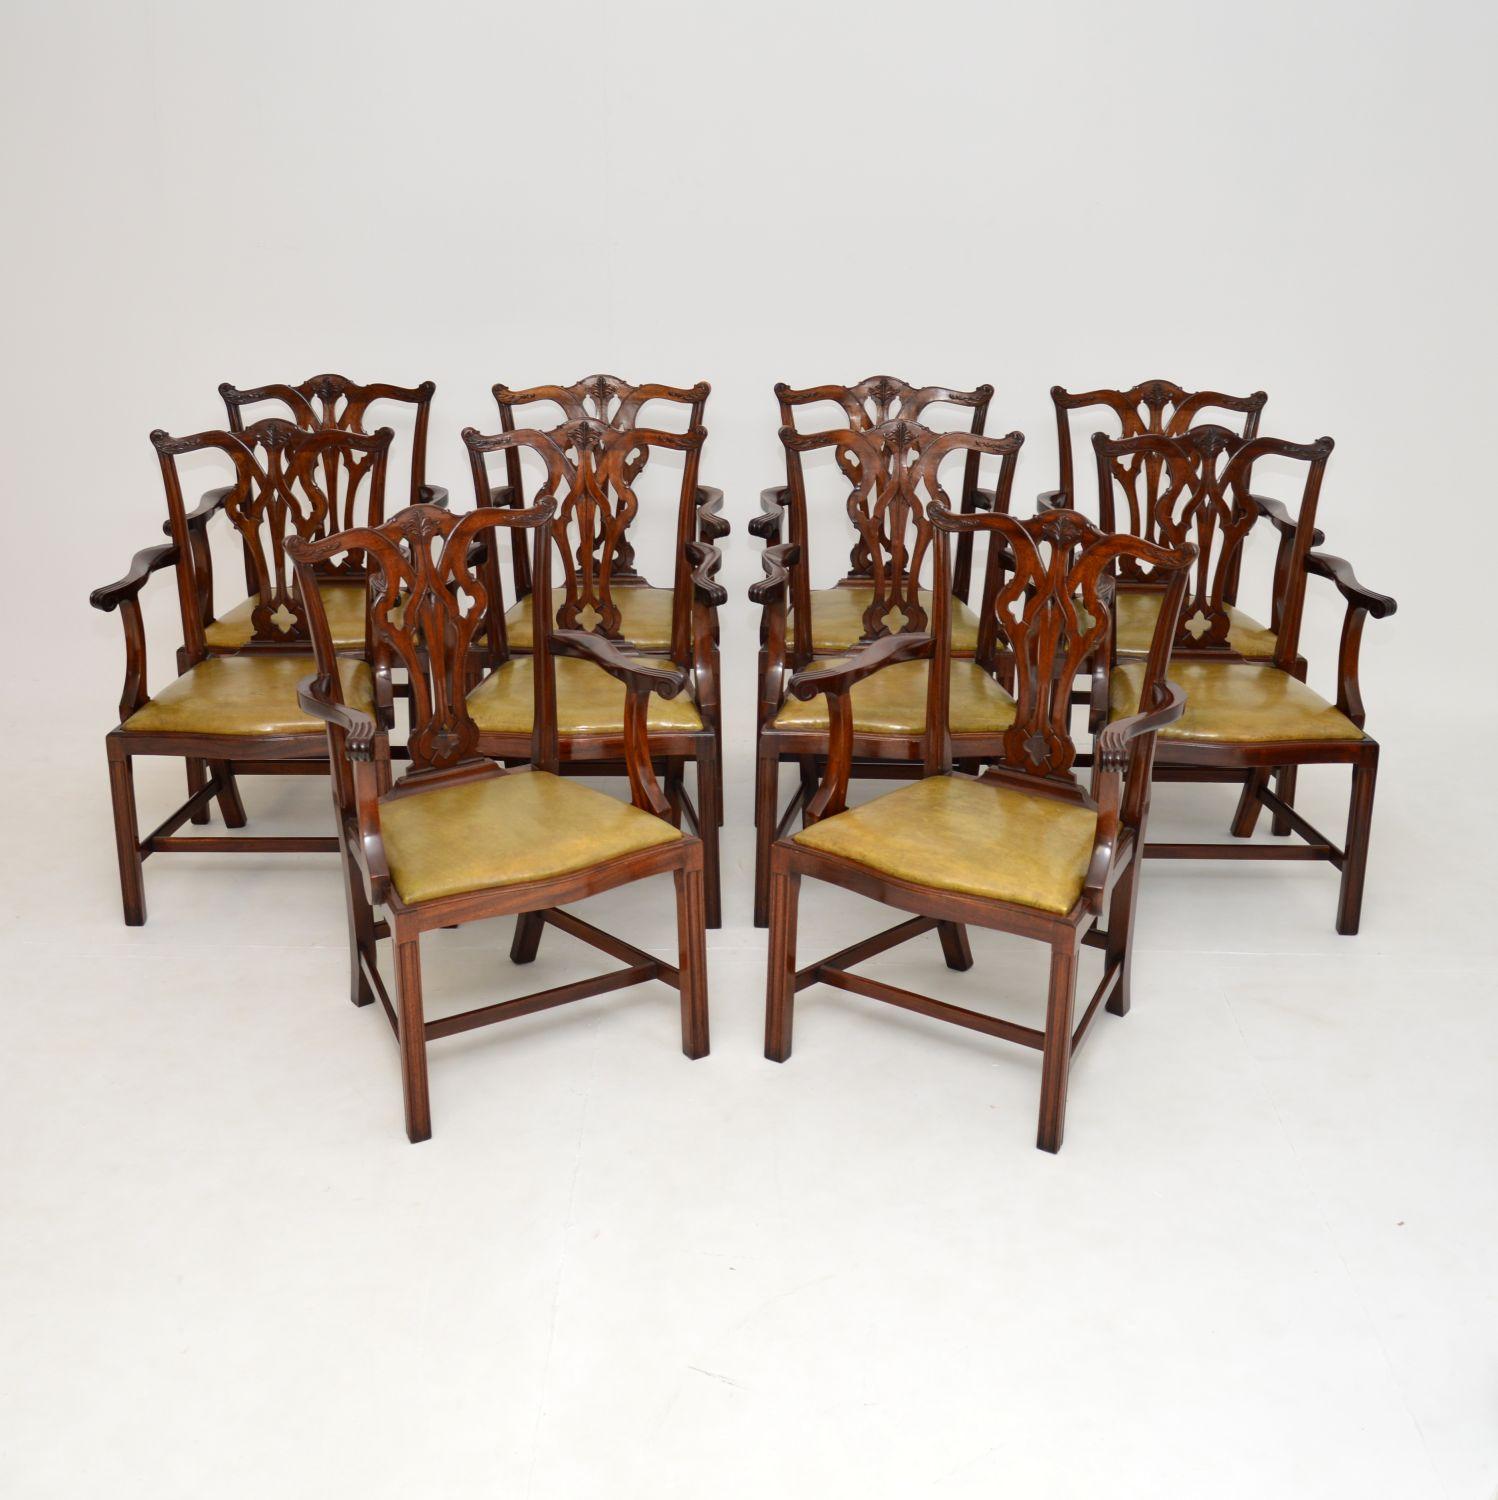 A magnificent set of 10 antique Chippendale style carver dining chairs. They were made in England, and date from around the 1900-1920’s period.

The quality is outstanding and it is very rare to find a set of ten like this, especially all with arms.